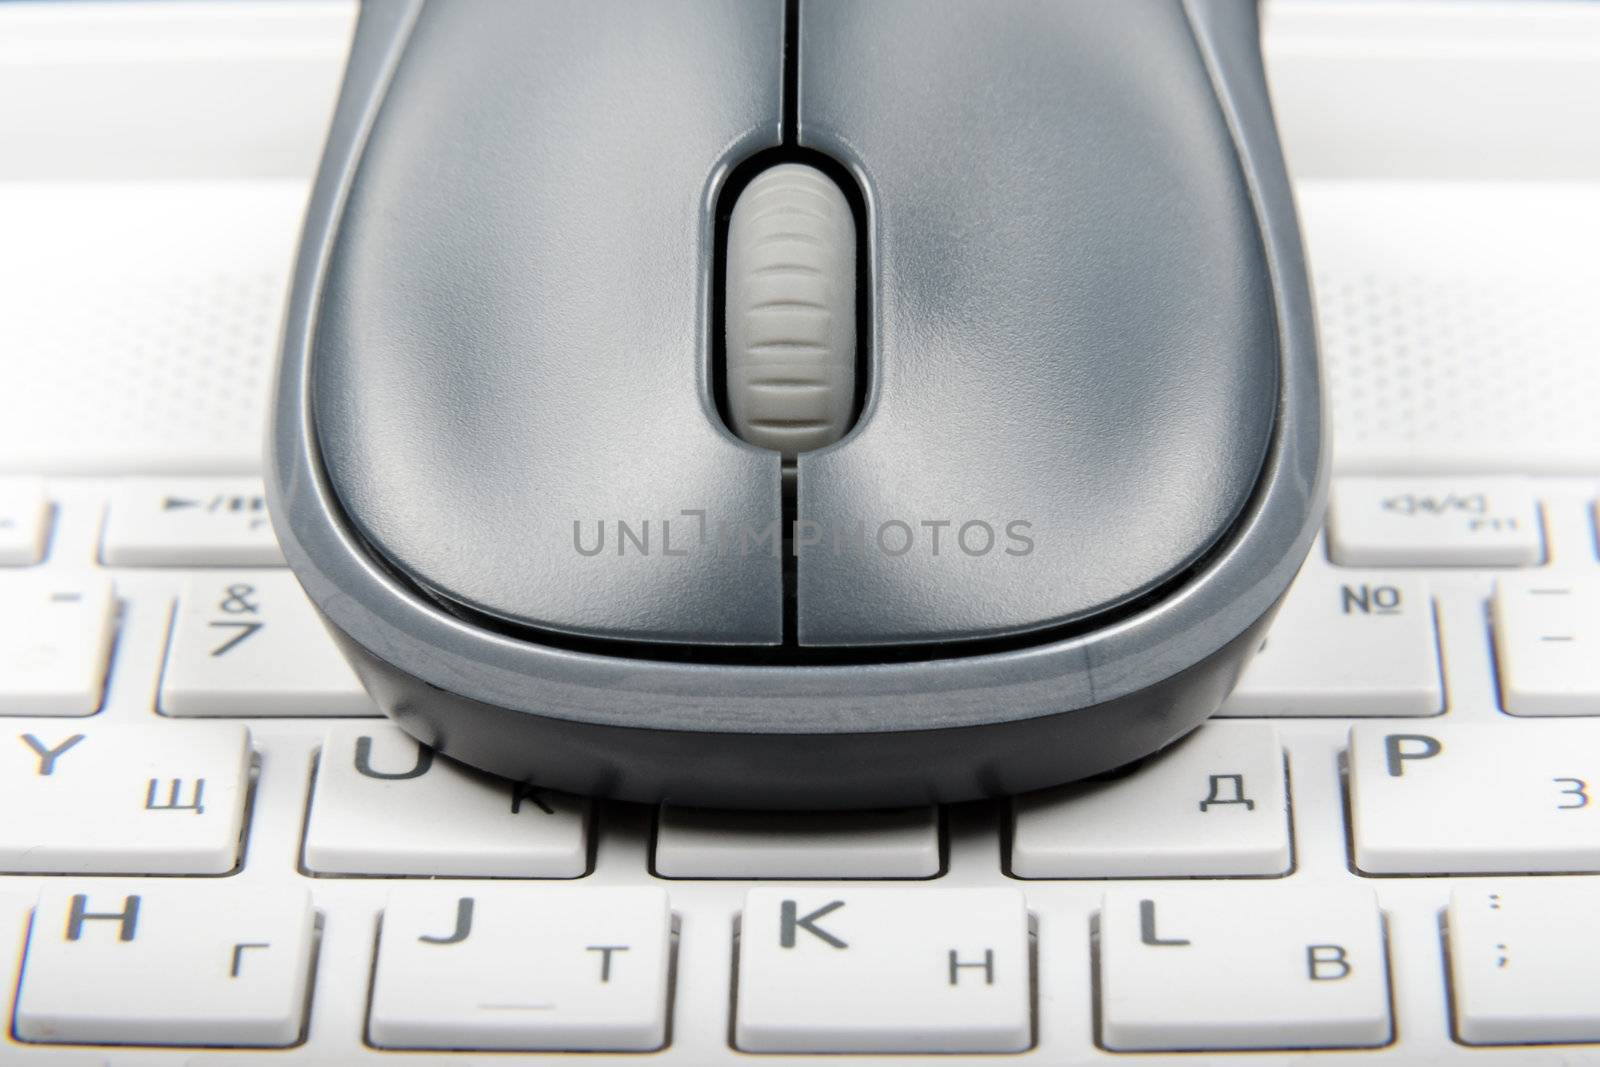 A wireless mouse placed on laptop keyboard